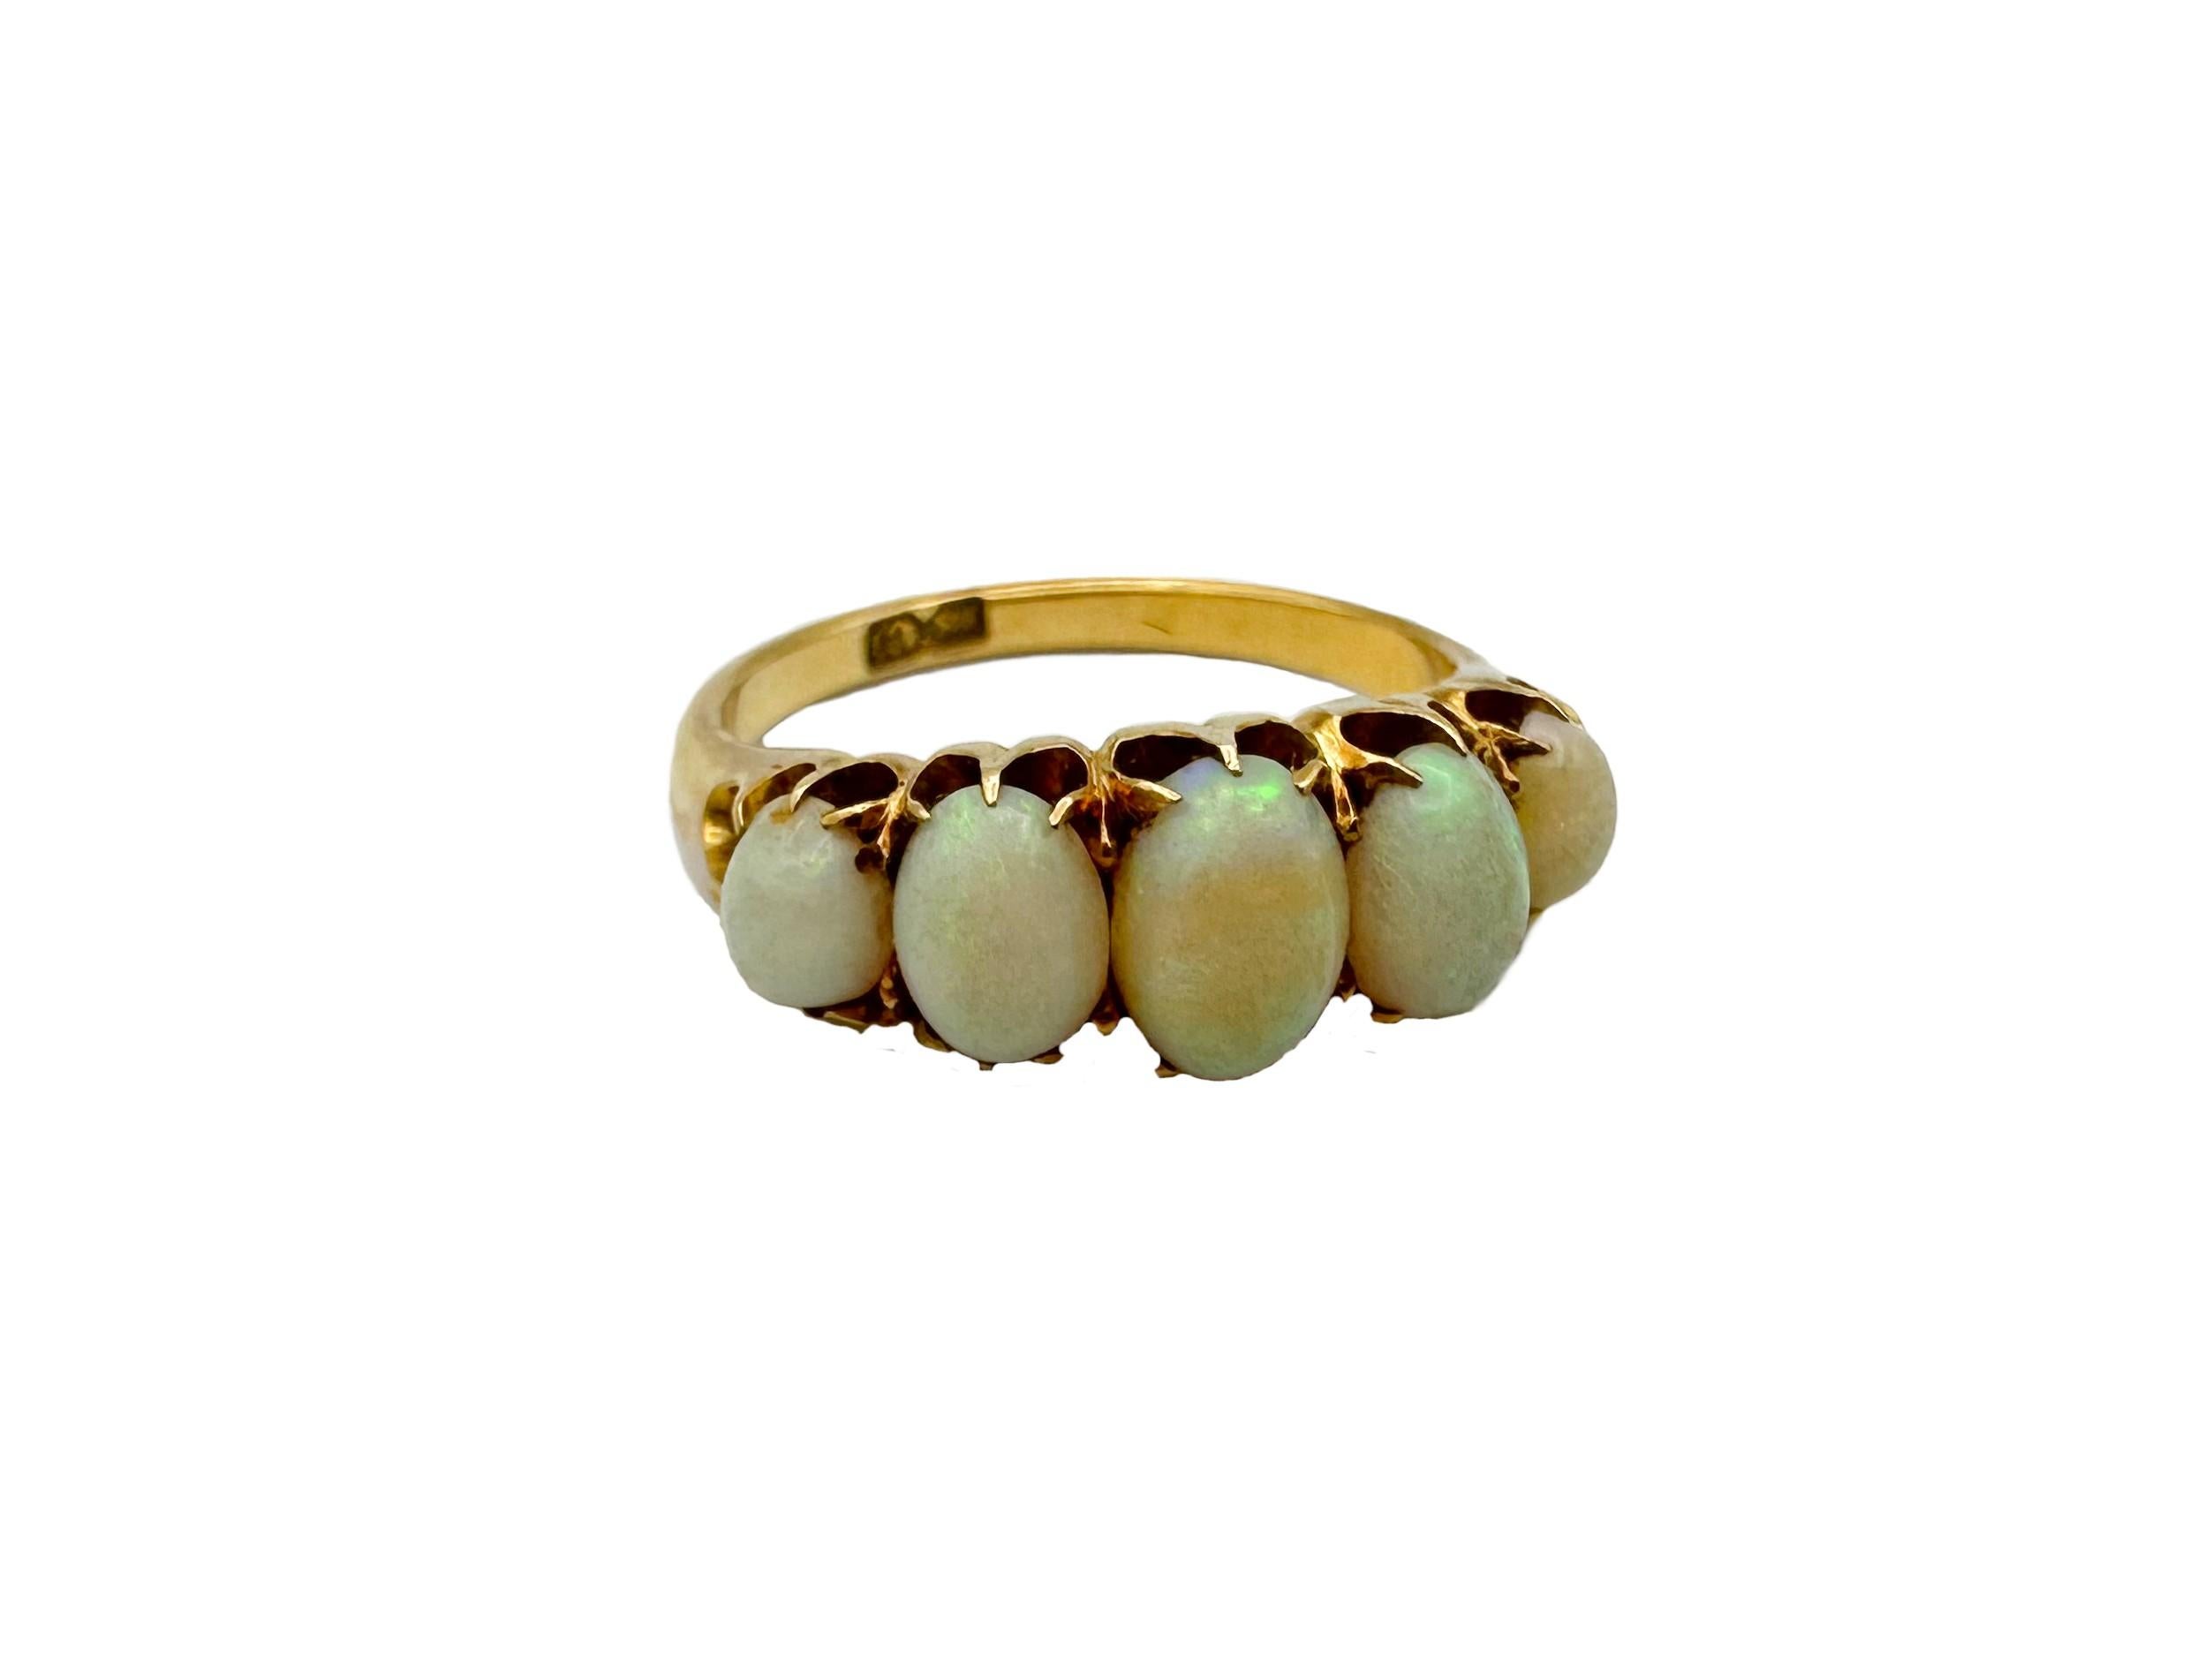 Antique Edwardian 5 stone white opal ring (circa 1910s), crafted in 18 karat yellow gold. The opals are set in a classic graduated 5 stone setting. The egg-shaped natural opals have a milky white bodycolor with a color play of fine bands and dots of